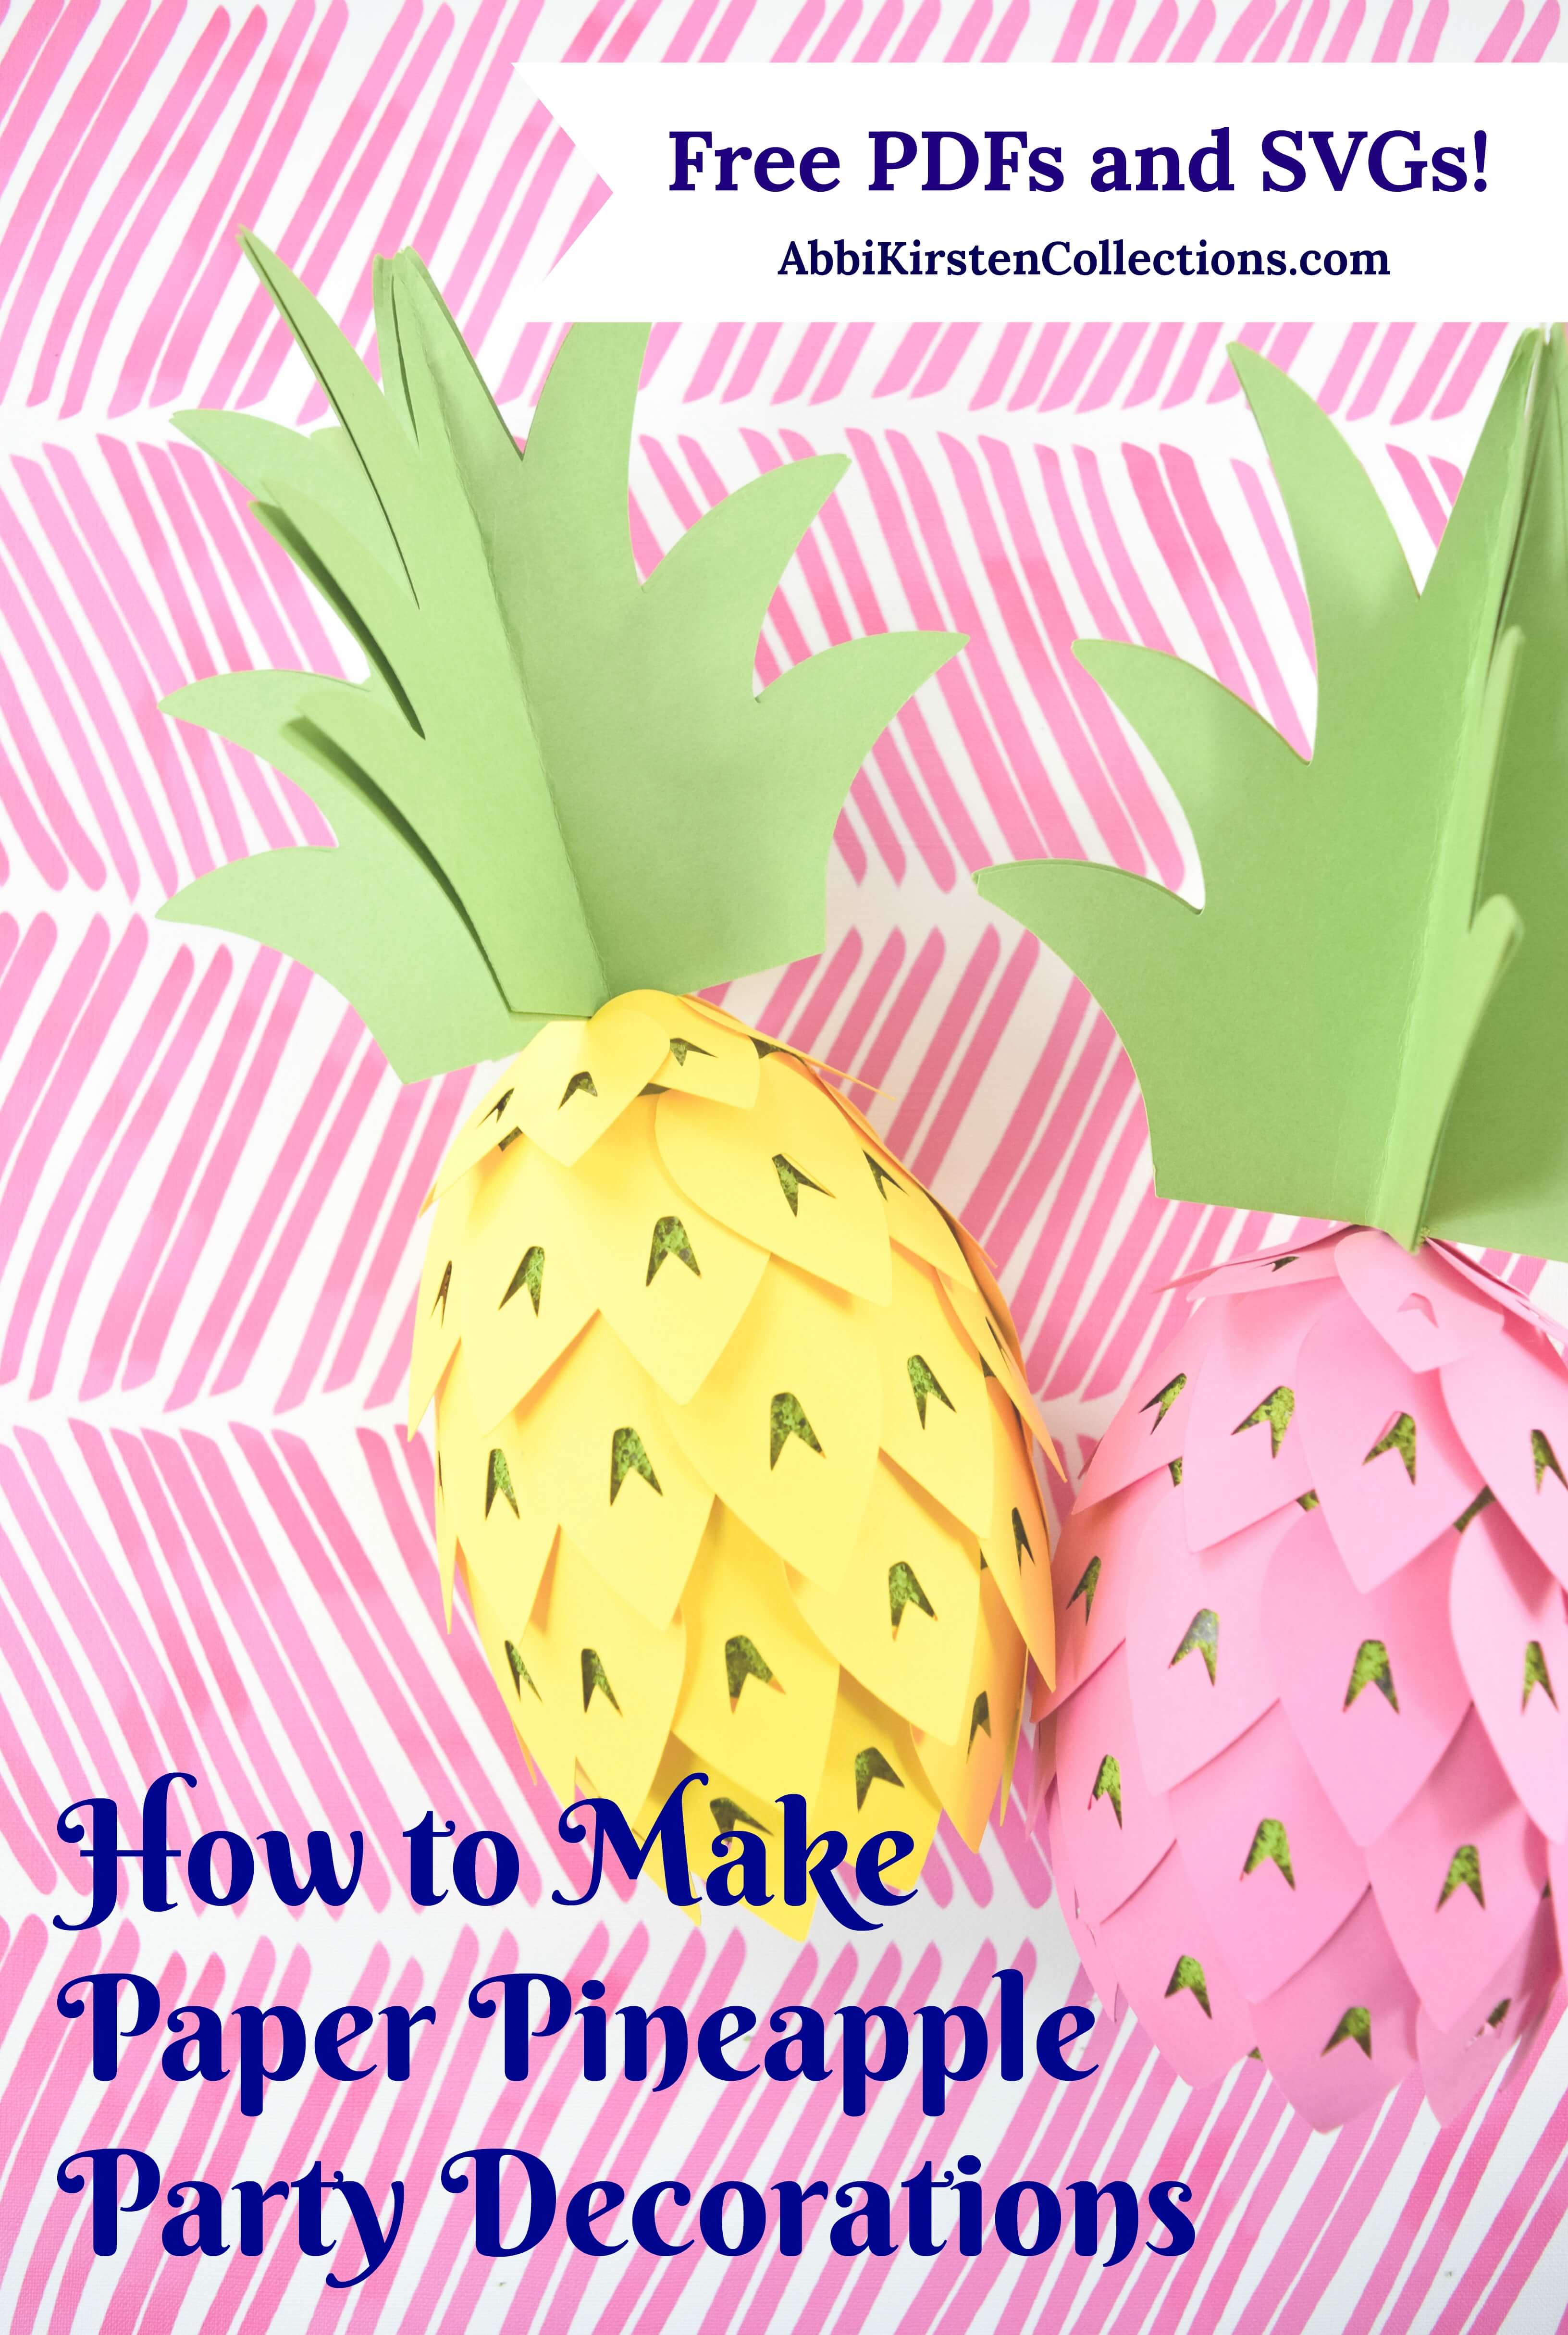 Two paper pineapples, one pink and one yellow, sit on a pink paper backdrop. The text reads, "How to Make Paper Pineapple Party Decorations" and "Free PDFs and SVGs abbikirstencollections.com."